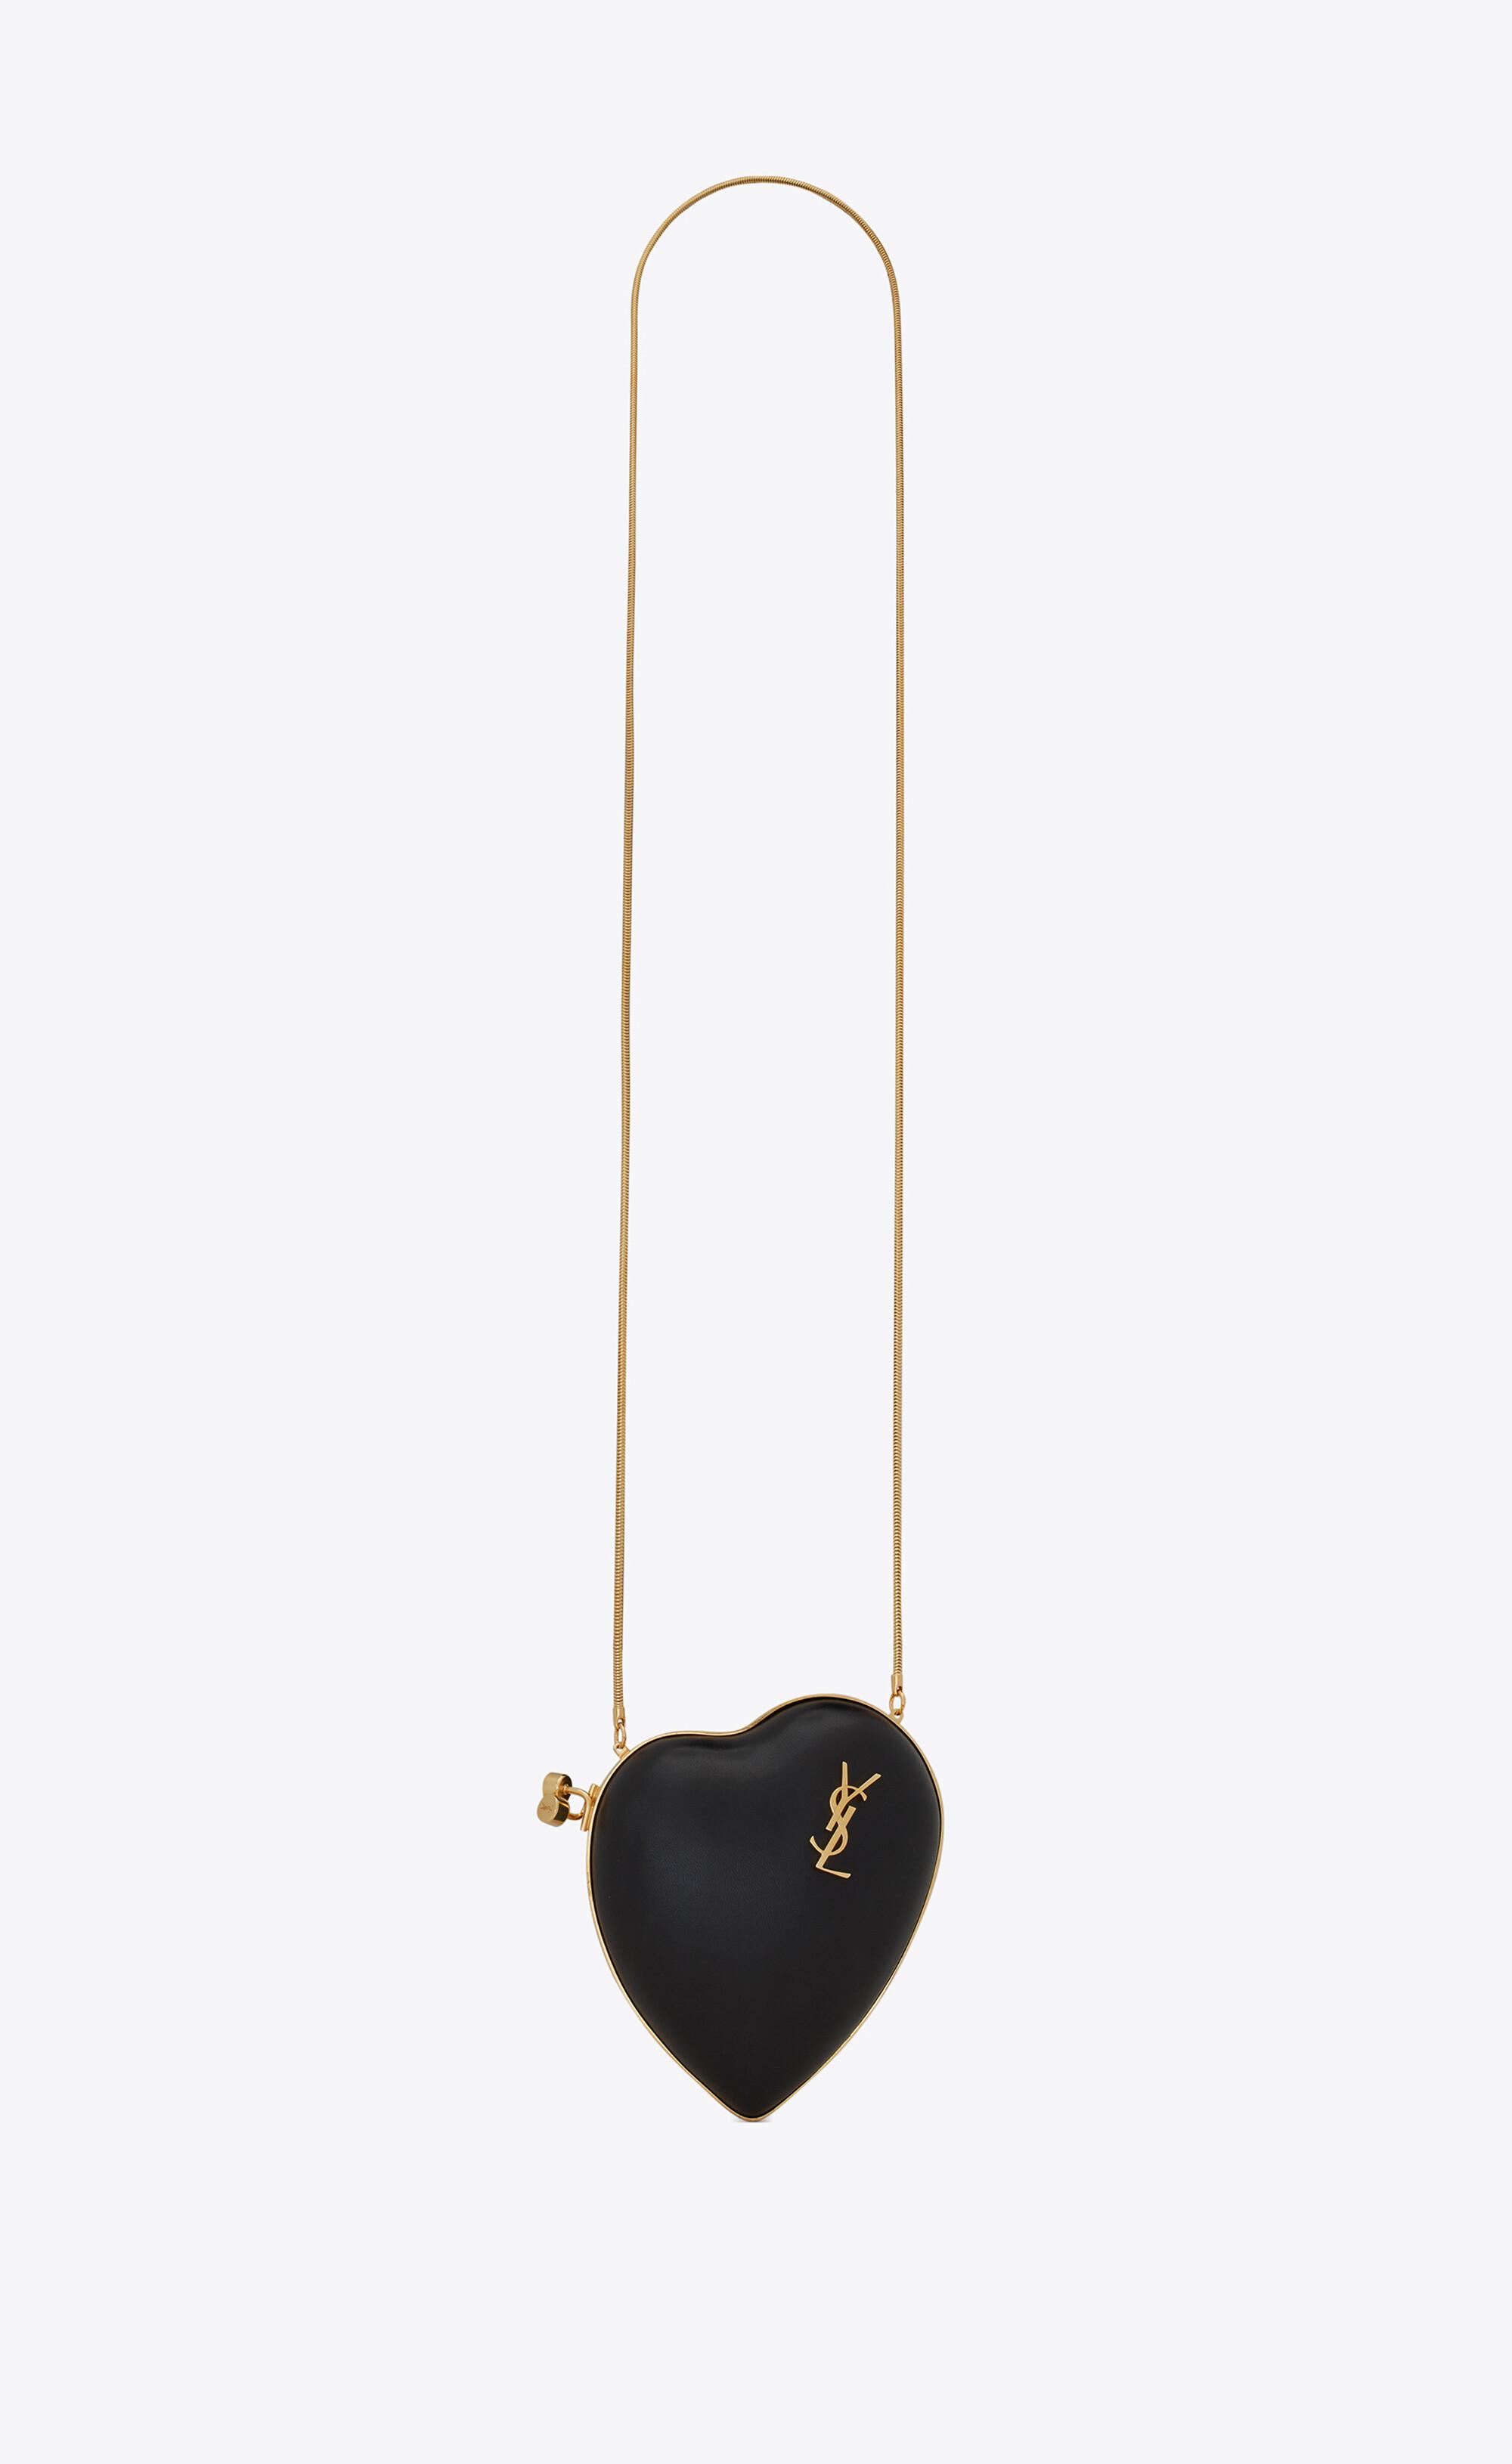 Saint Laurent Love Box In Smooth Leather in Black